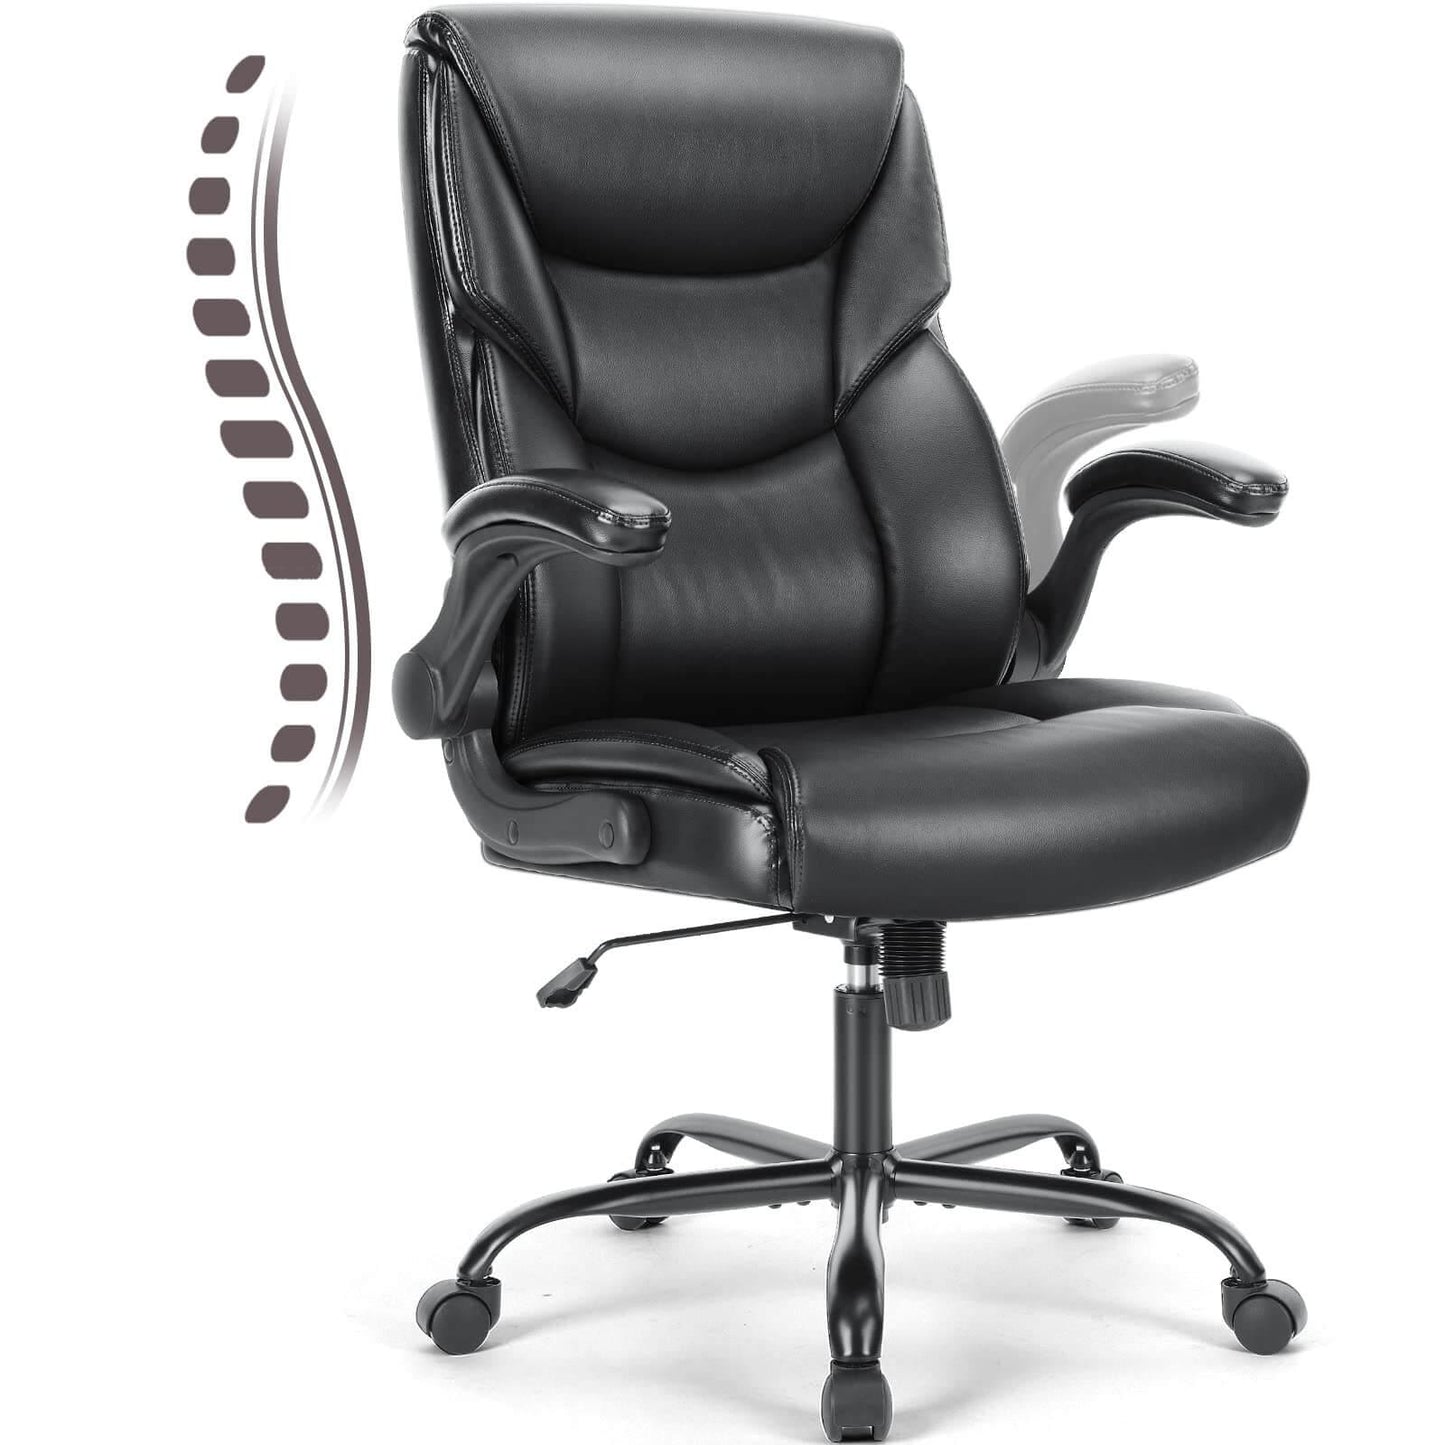 Tall Executive Office Chair with High Back and Wide Seat